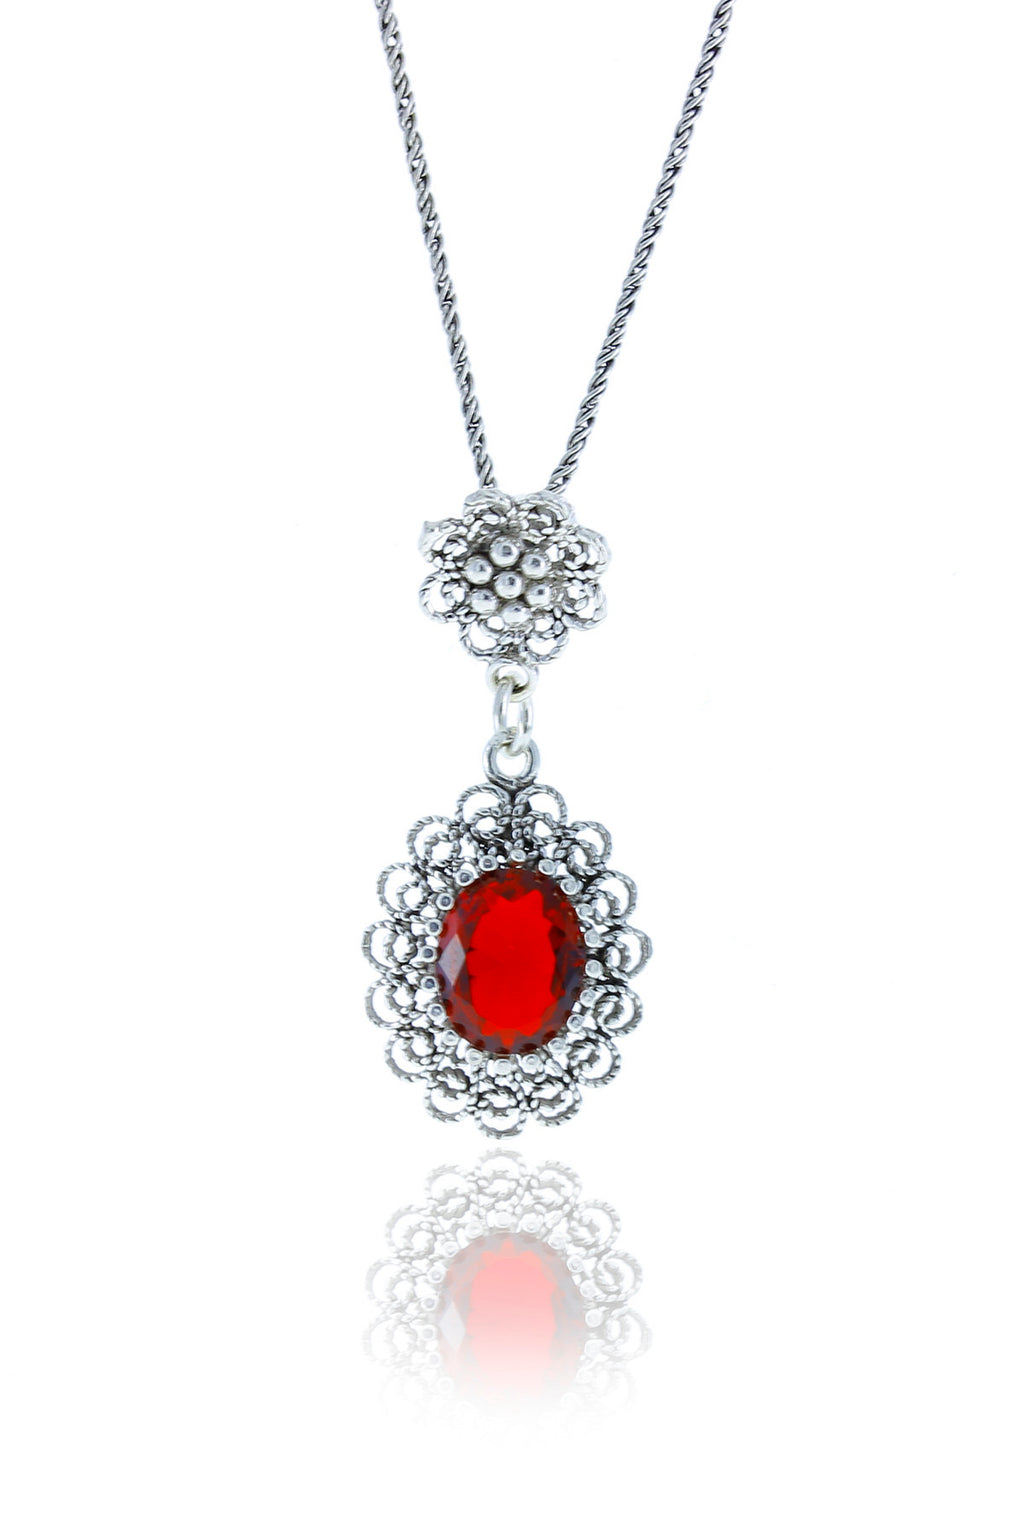 Drop Model Authentic Filigree Silver Necklace With Ruby (NG201017527)